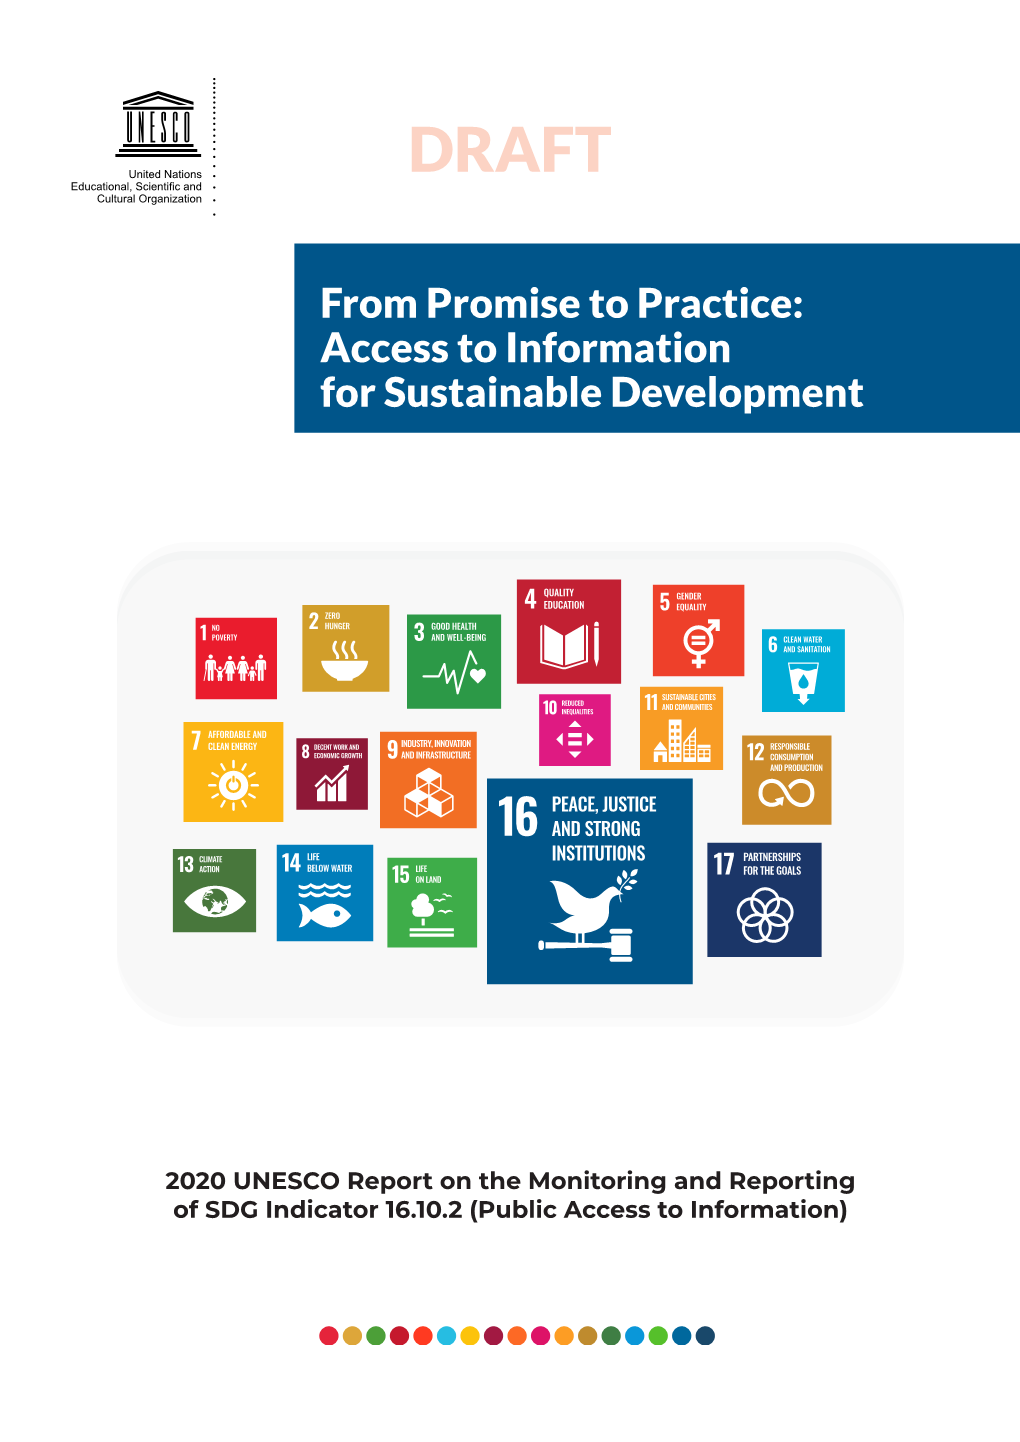 From Promise to Practice: Access to Information for Sustainable Development